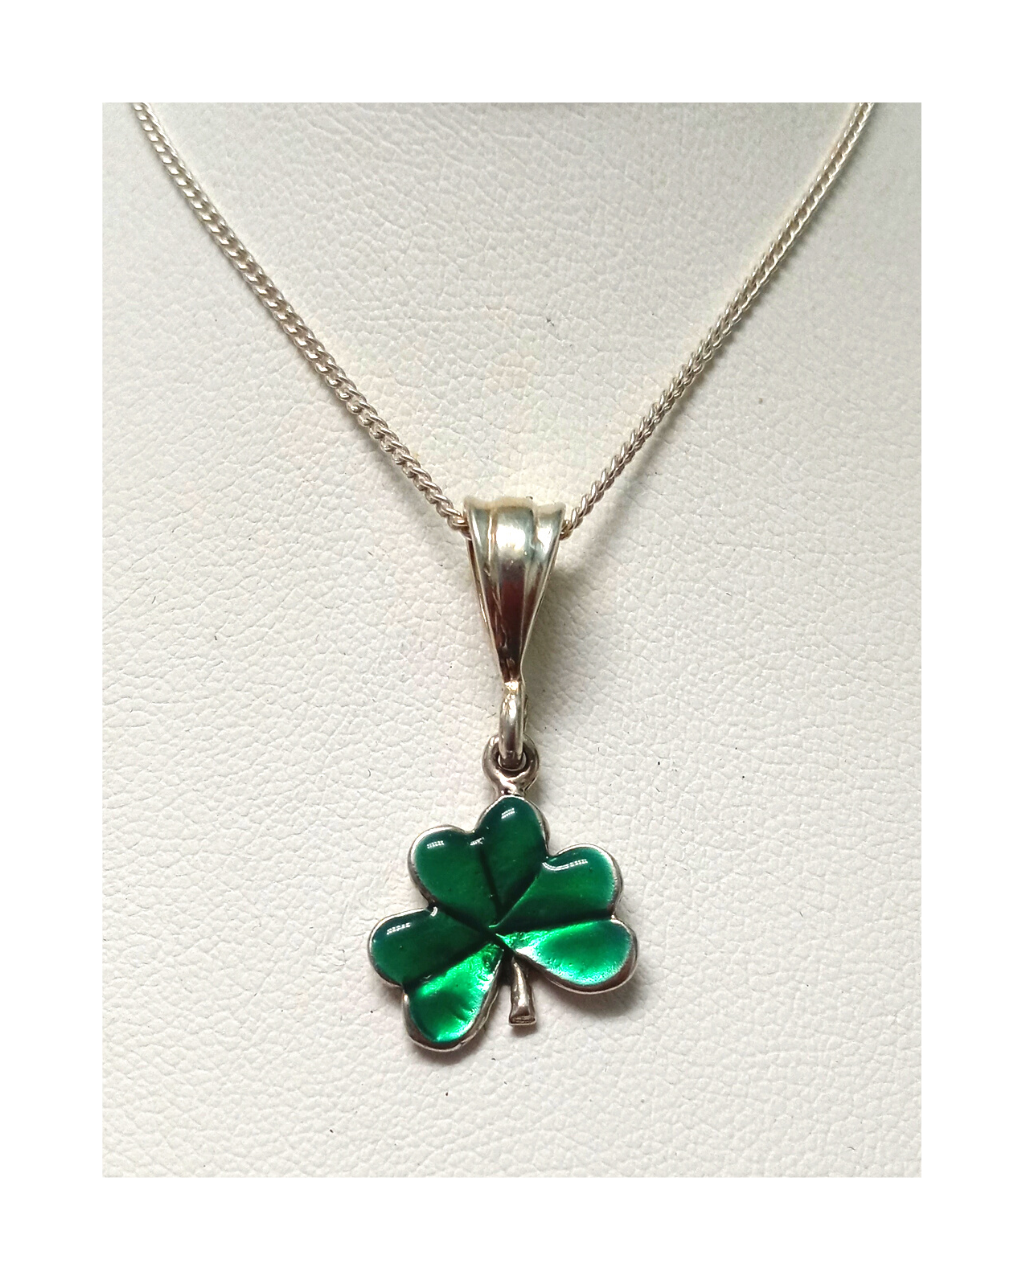 Exclusive Green Hand-enameled Sterling Shamrock Removable Pendant with Chain